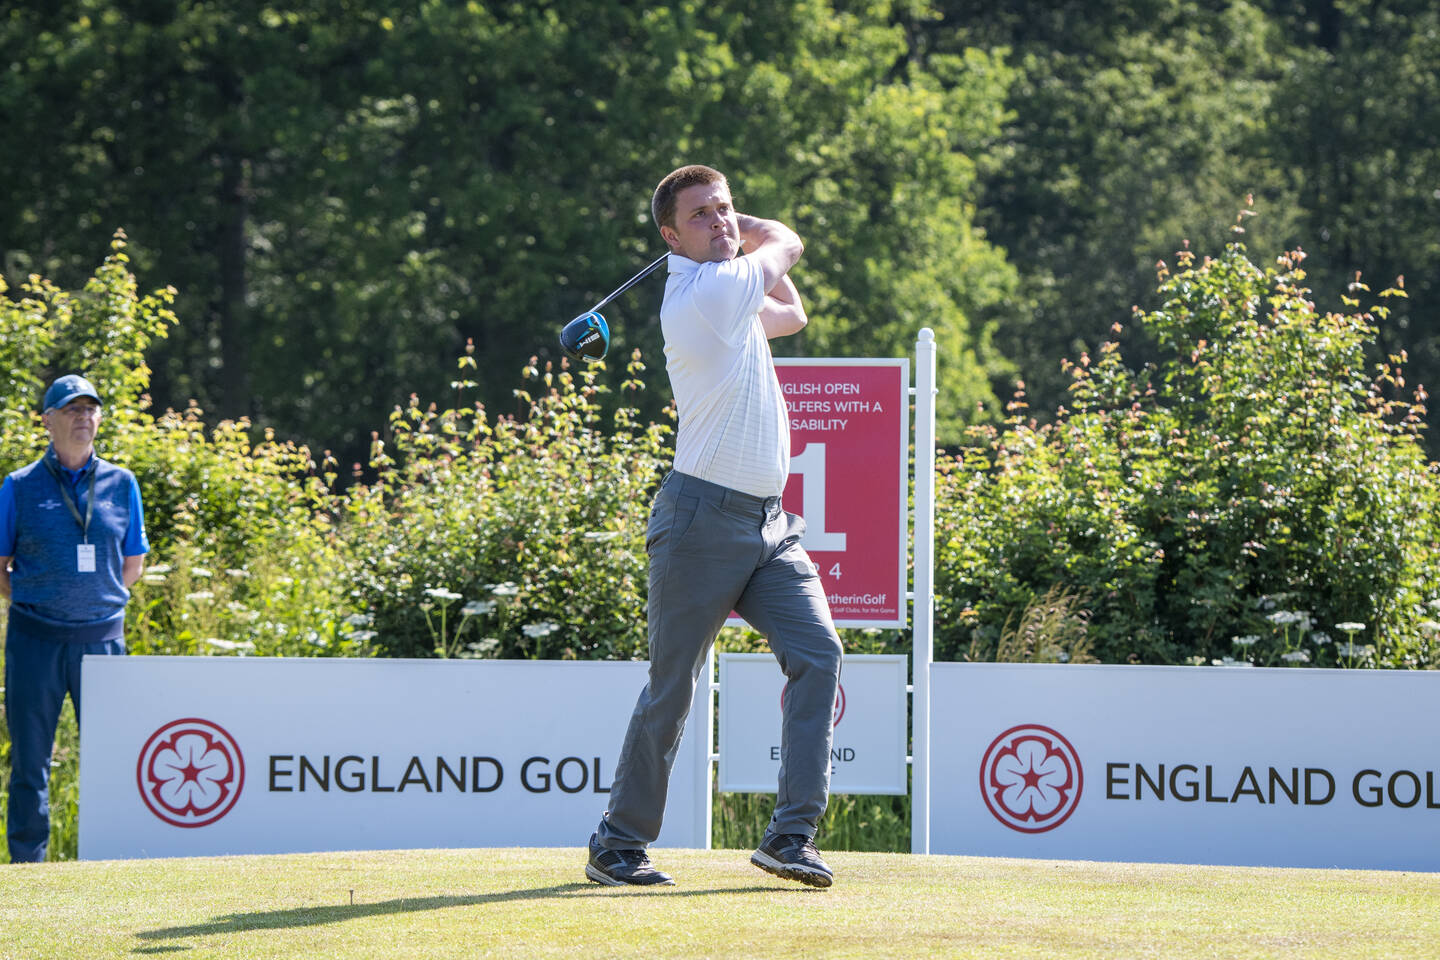 Kipp Popert - the Kent golfer, who has Cerebral Palsy affecting his lower body, won the 2021 English Open for Golfers with a Disability